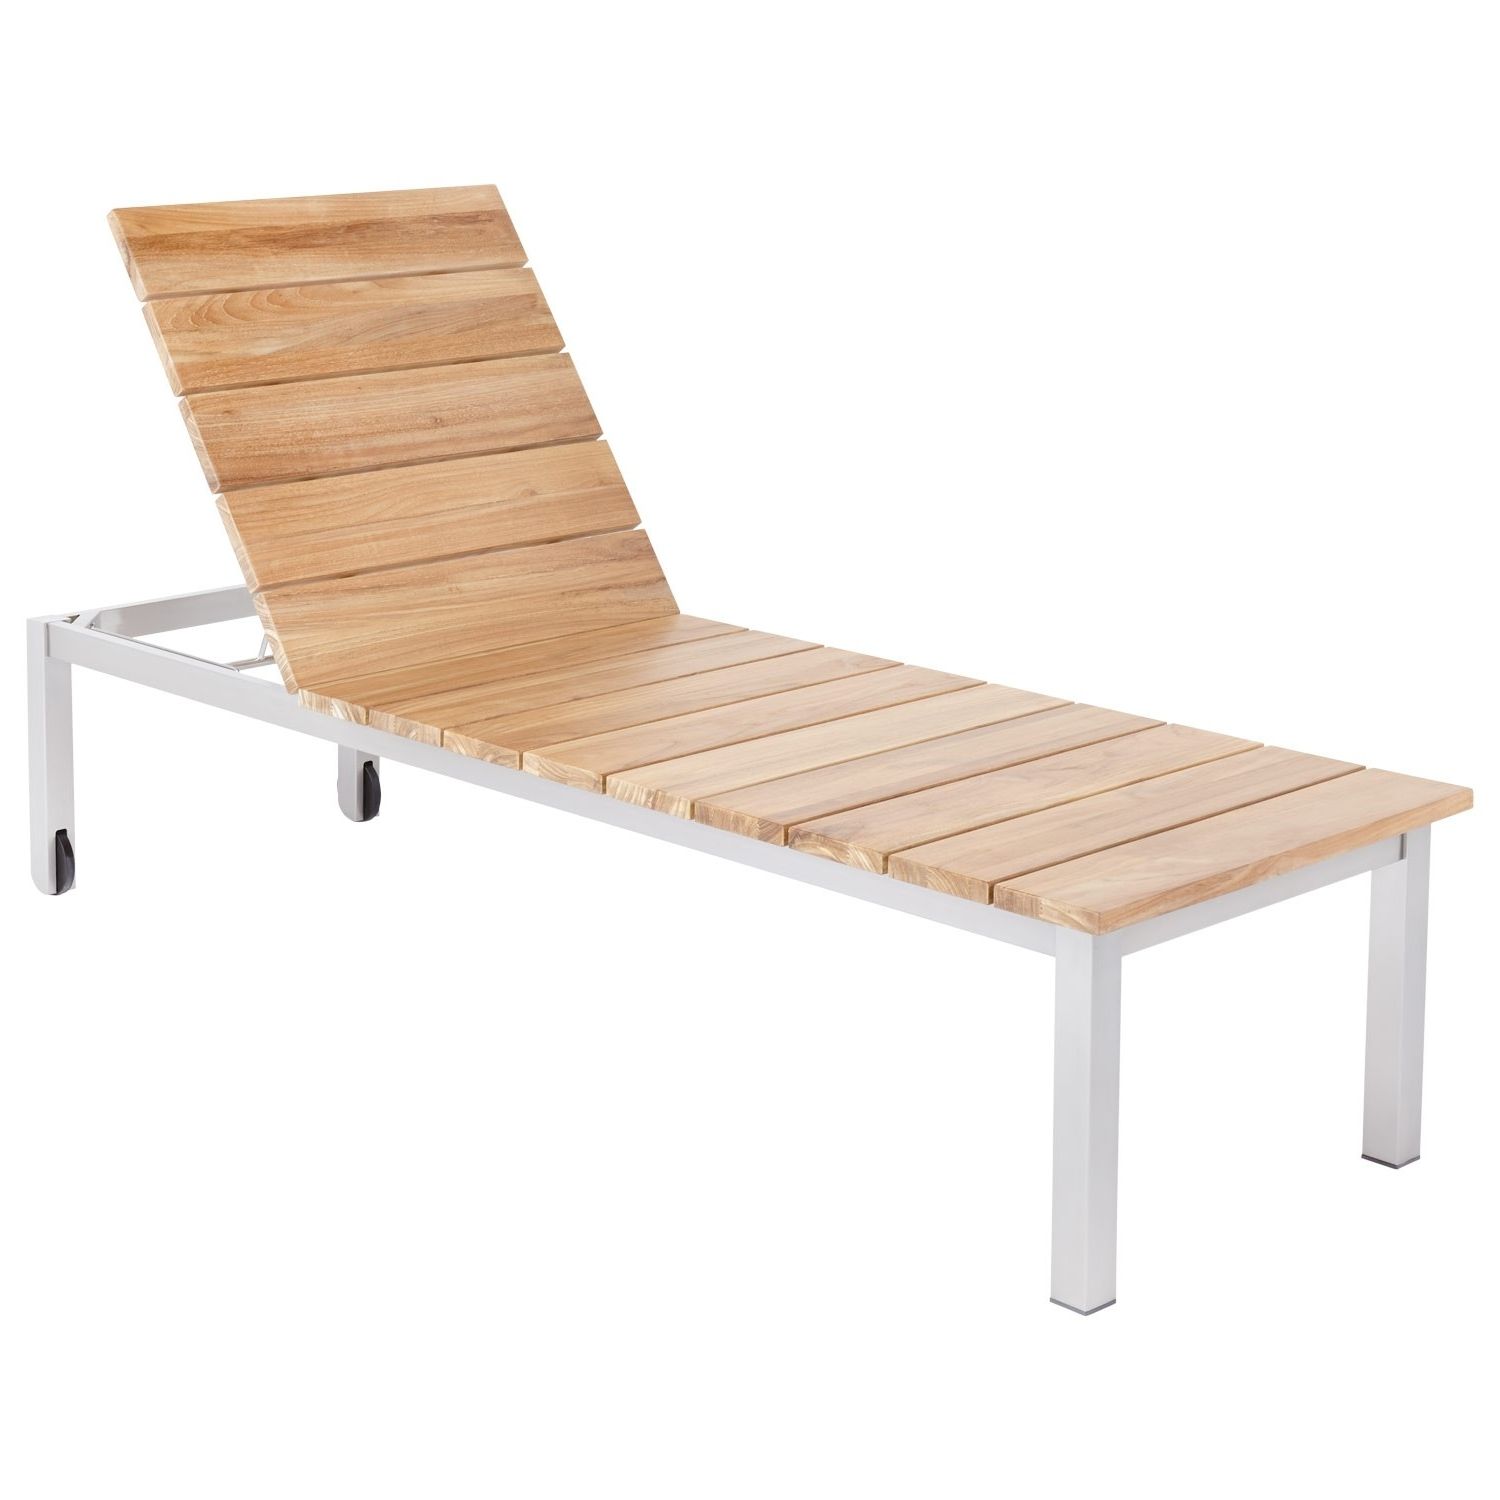 Macon Teak Outdoor Chaise Lounge Chair – Natural Teak – Outdoor With 2018 Teak Chaise Lounges (View 3 of 15)